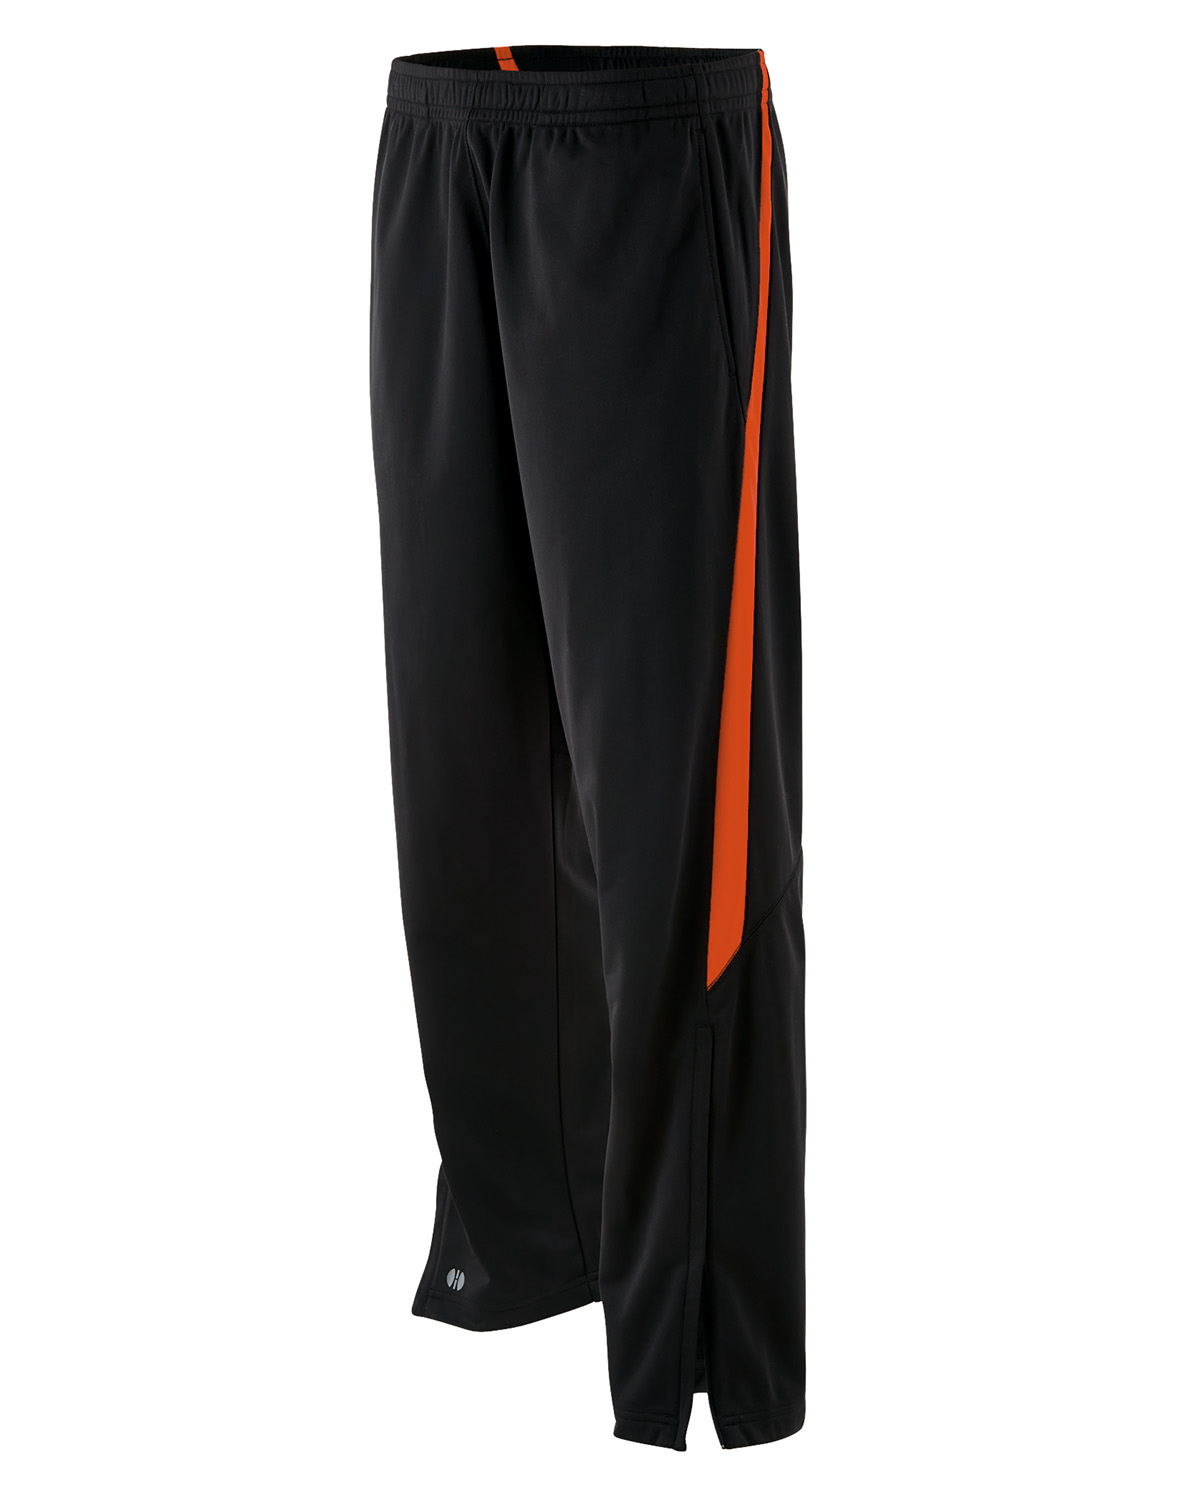 Holloway 229143 - Adult Polyester Determination Pant